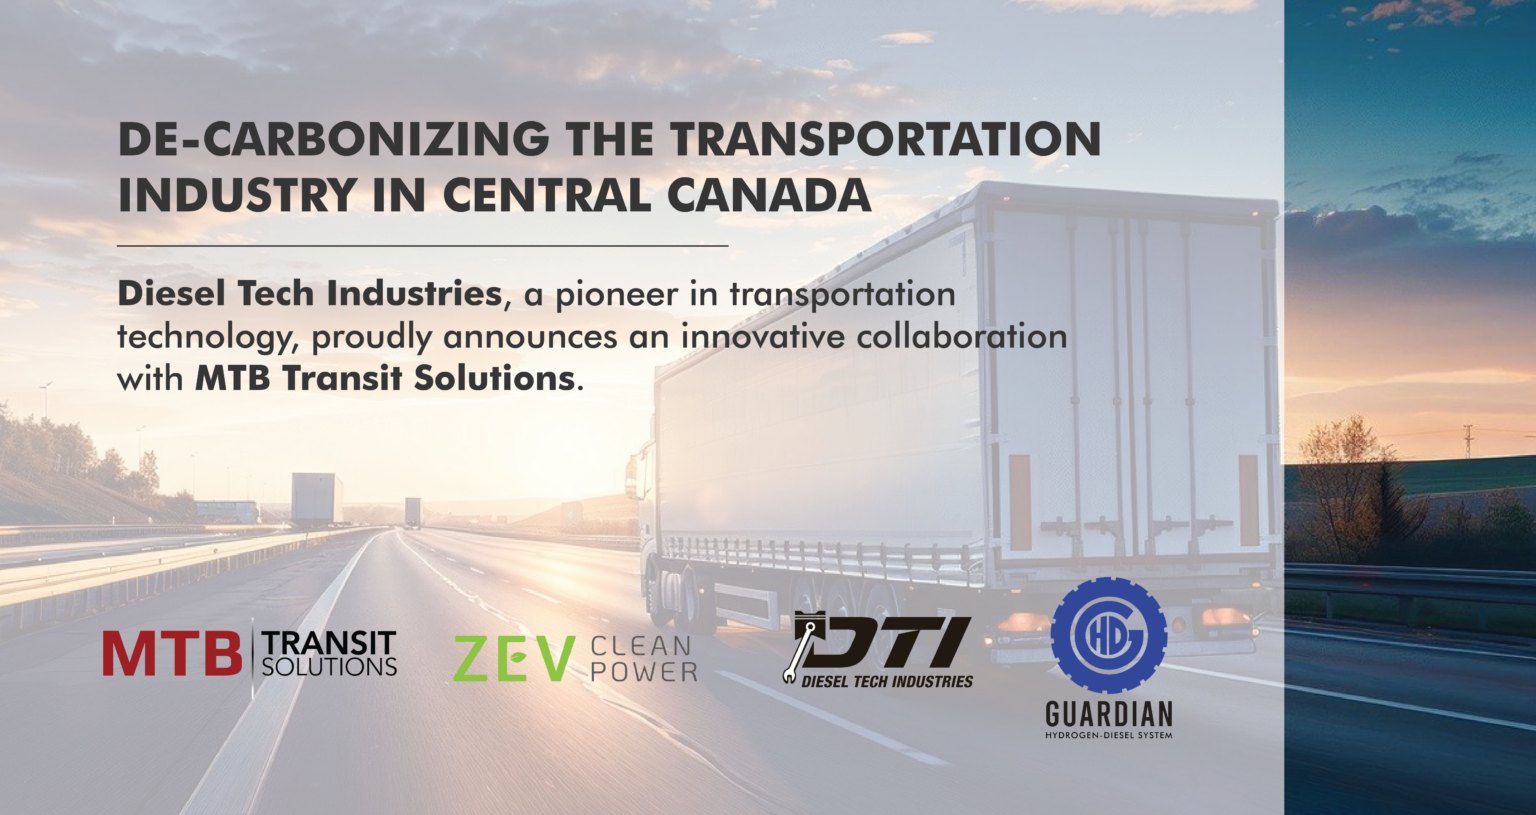 Diesel Tech Industries (DTI), a pioneer in transportation technology, proudly announces an innovative collaboration with MTB Transit Solutions (MTB)